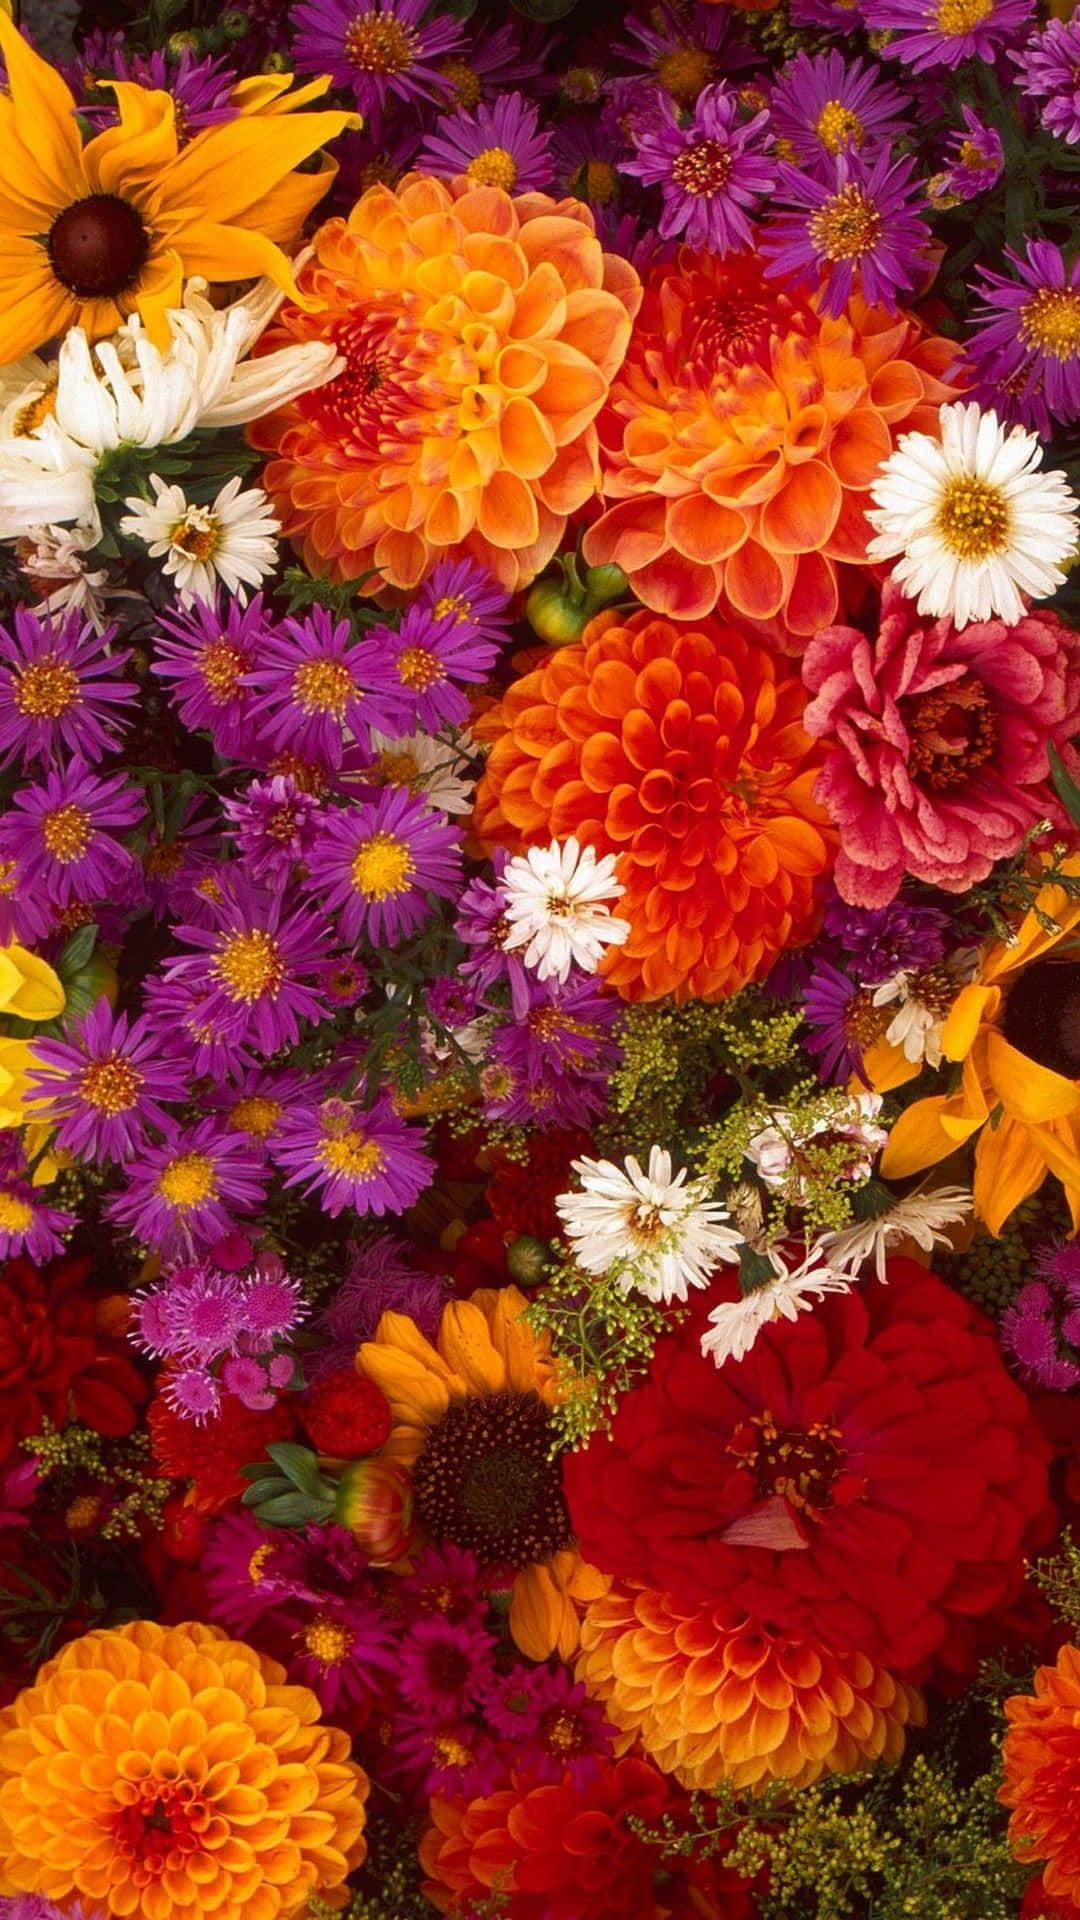 Autumn Flowers With Android Daisies Background